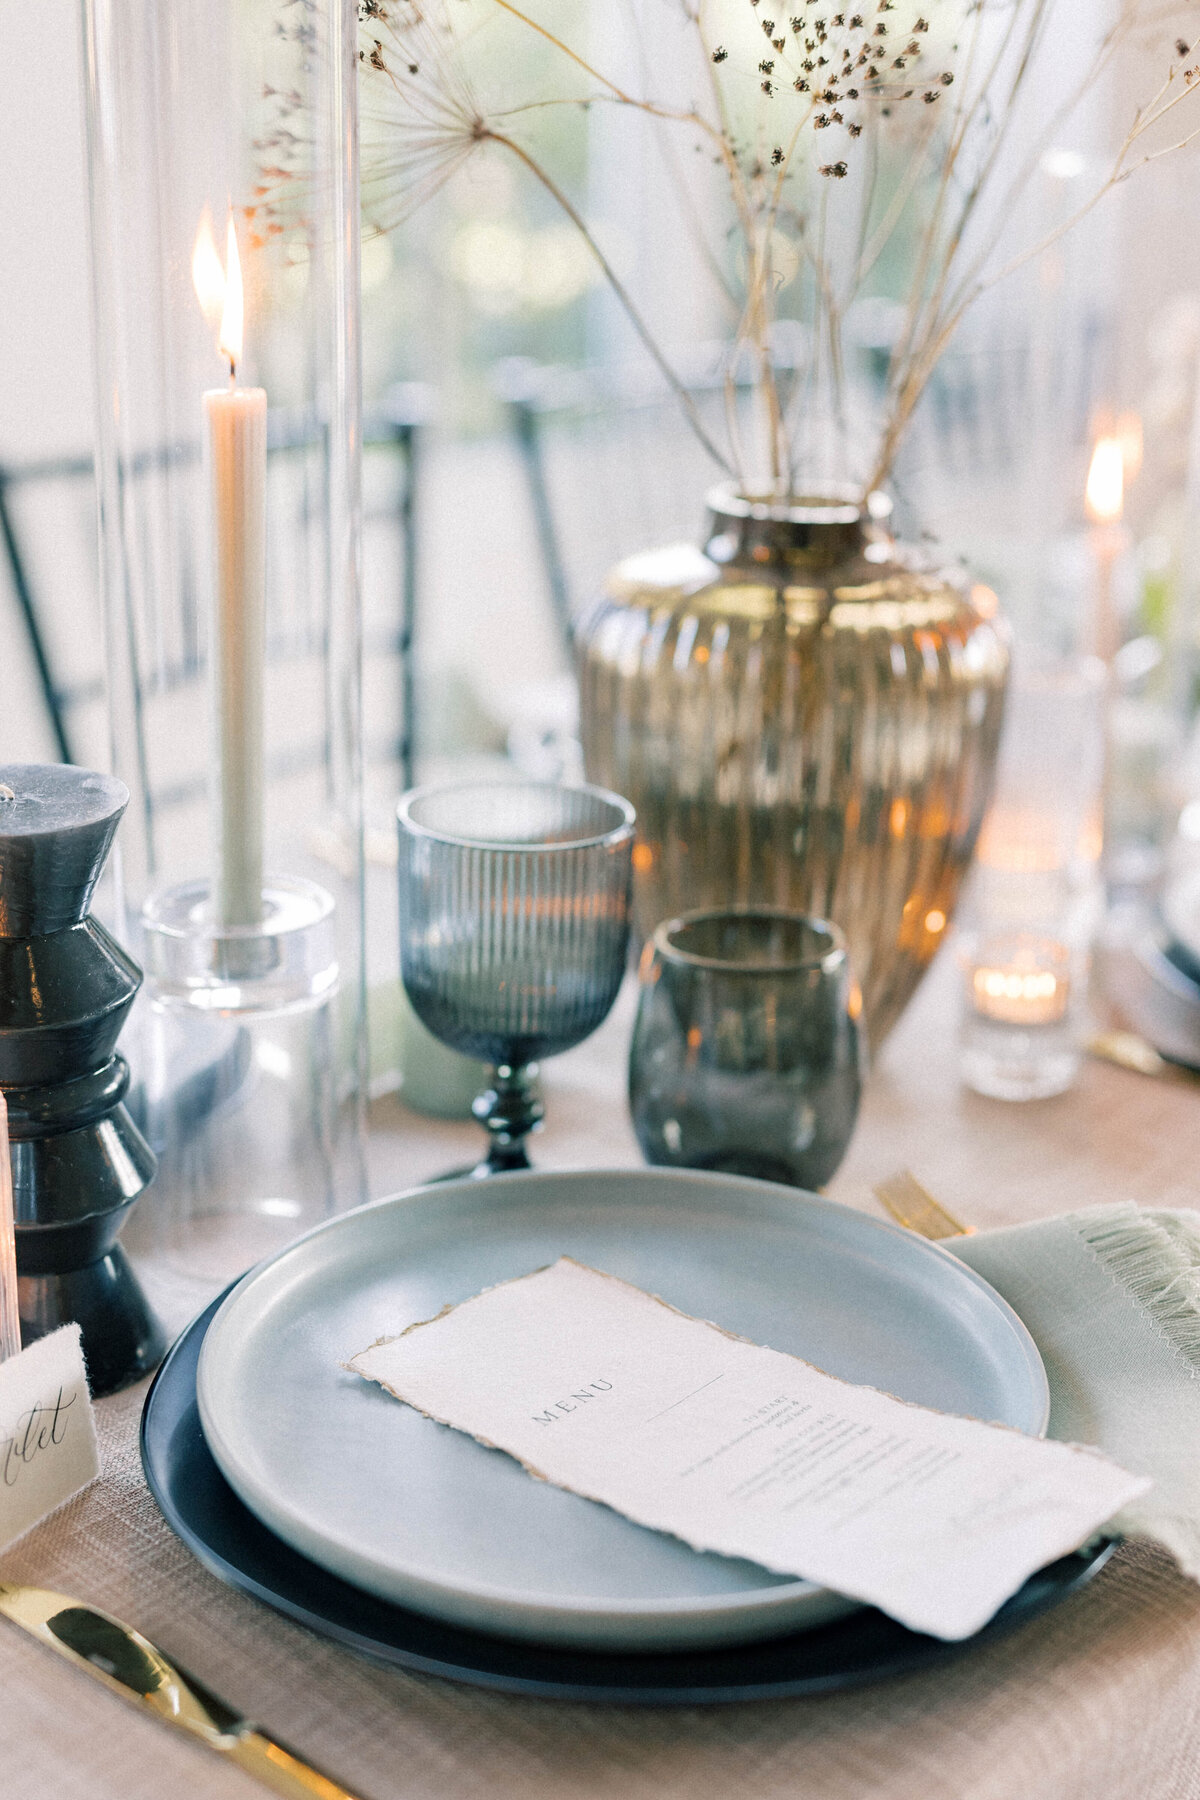 luxury tennessee tablescape with neutral tone and deckled edge menu by scruffy city lettersby